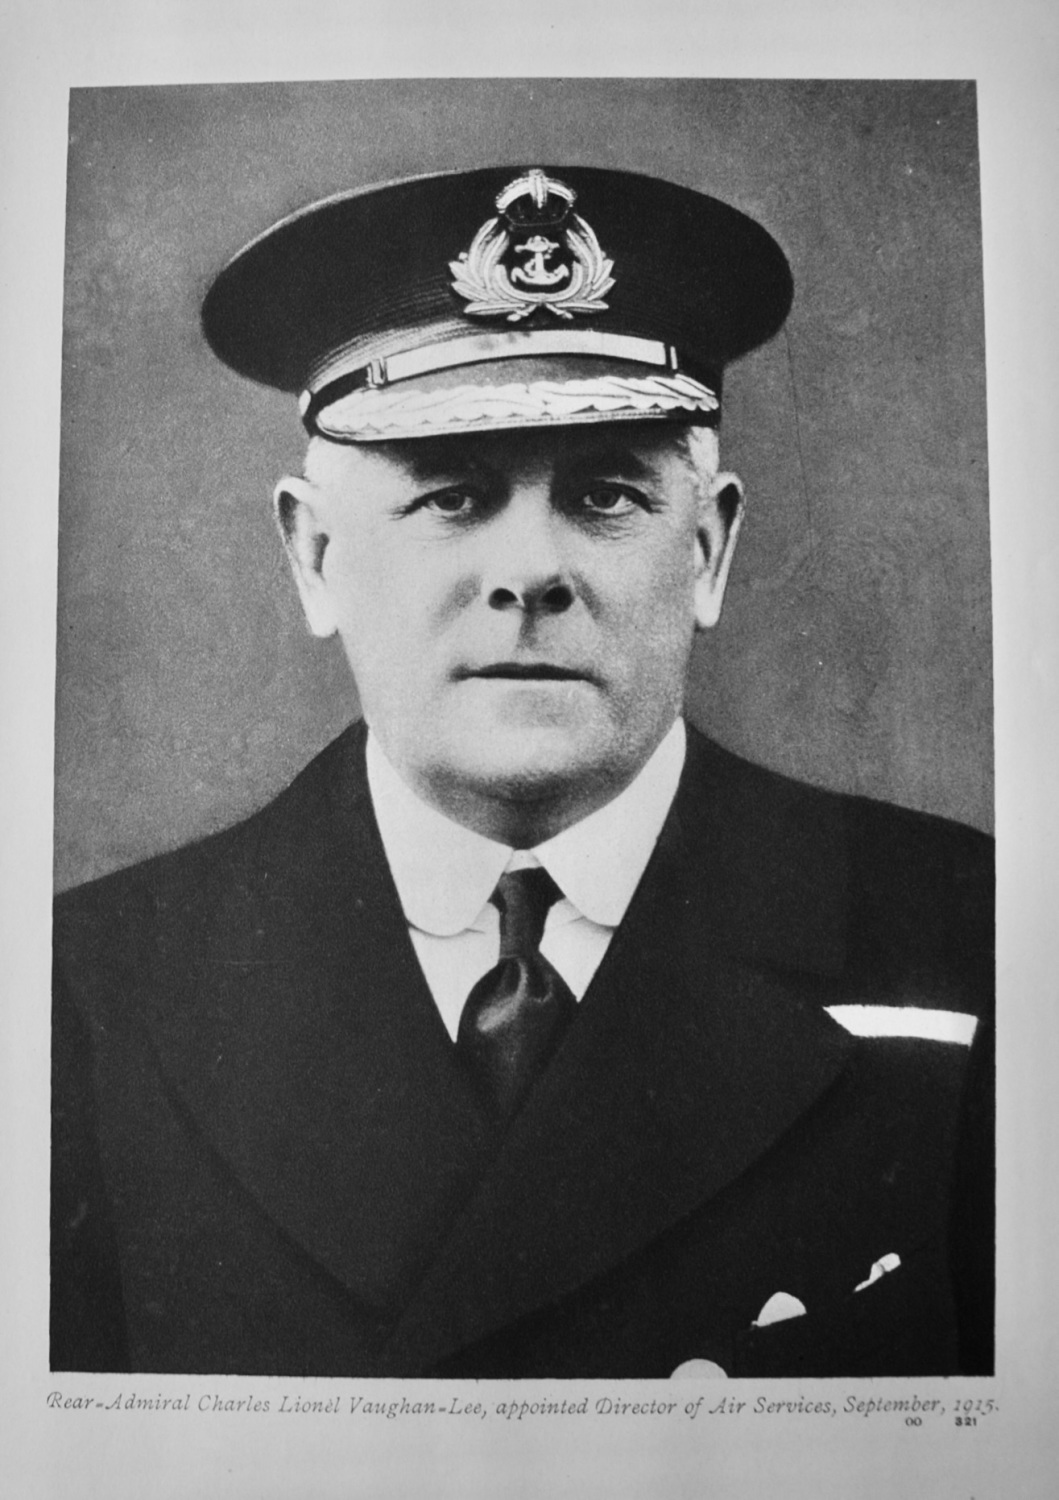 Rear-Admiral Charles Lionel Vaughan-Lee, appointed Director of Air Services